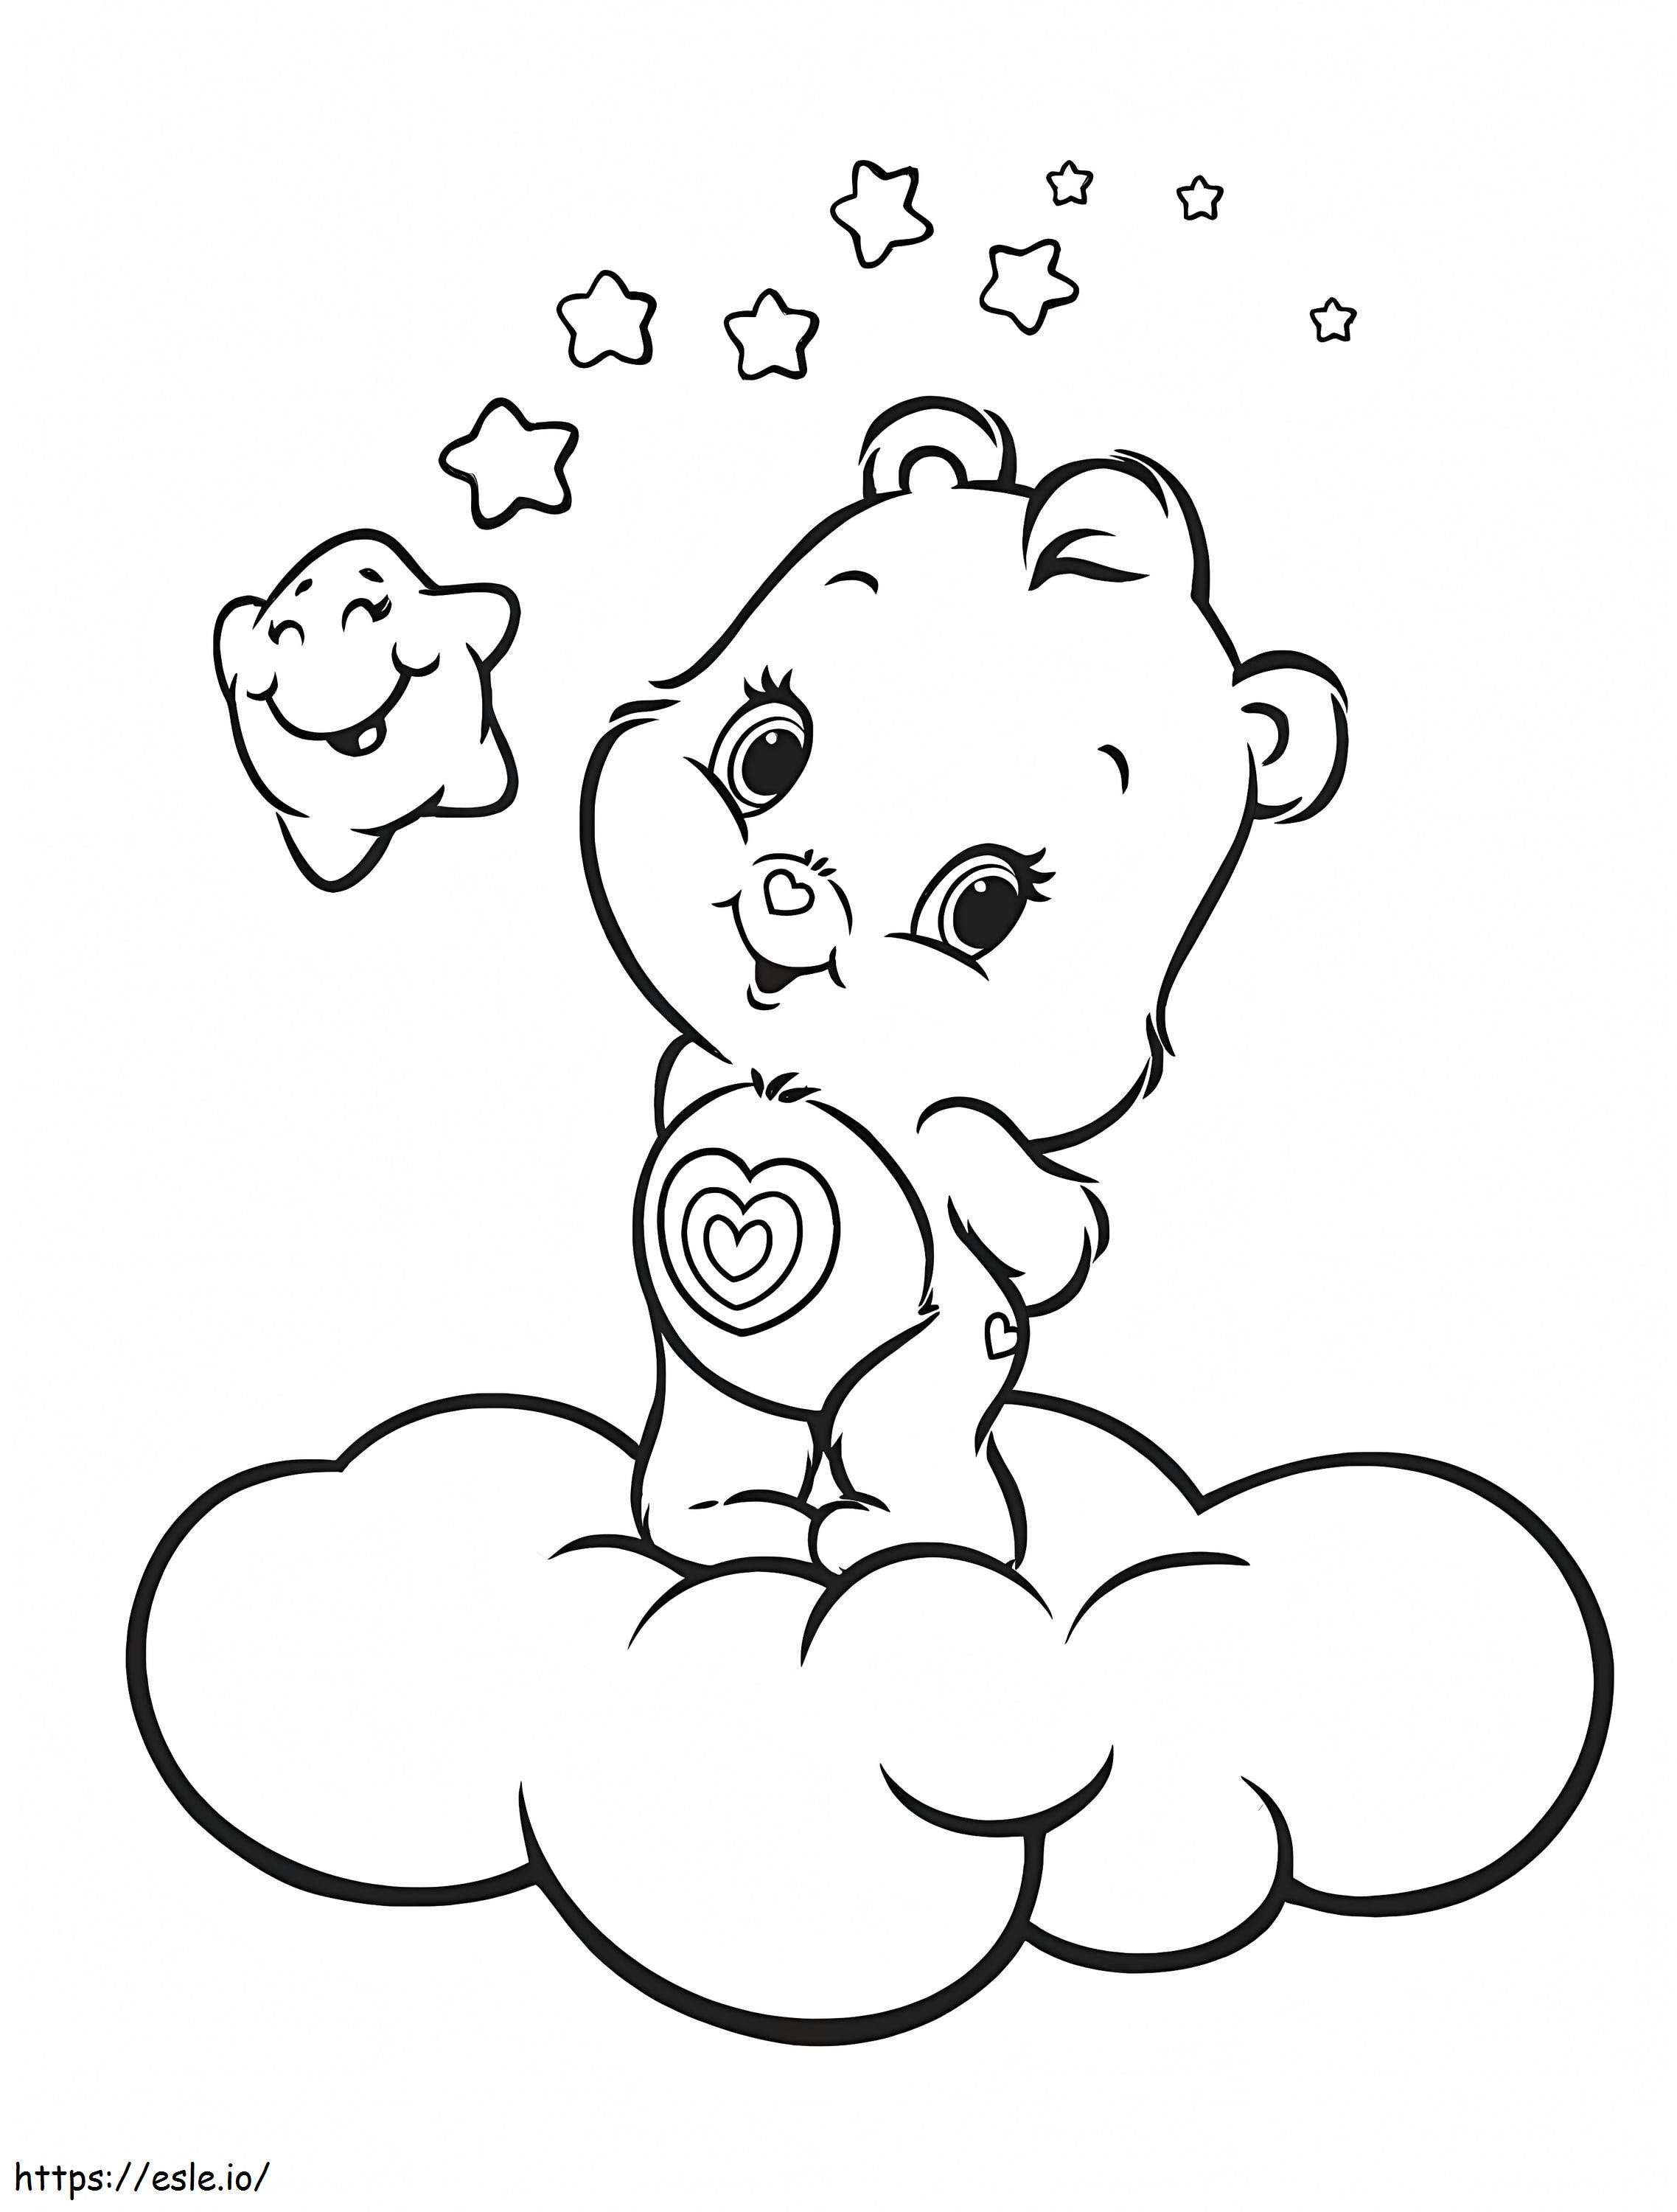 Lovely Bears coloring page